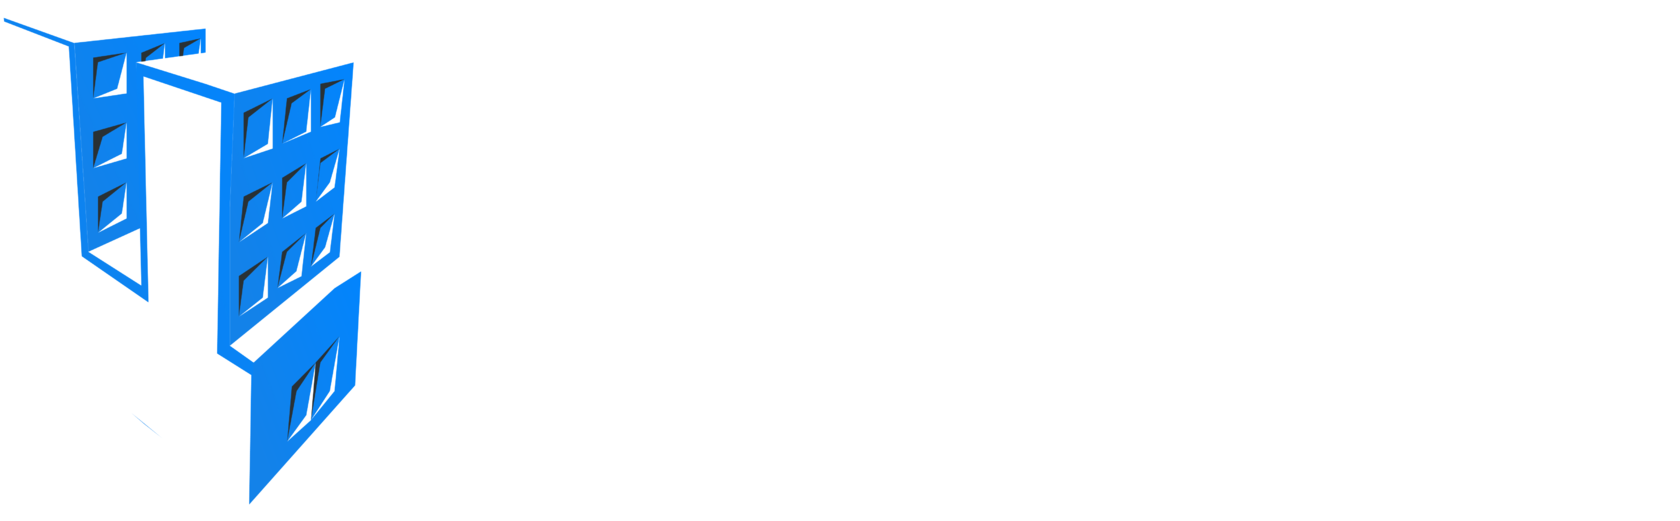 Https cyfral group. Цифрал сервис. Цифрал сервис лого. Цифрал сервис Брянск. Цифрал-сервис.РФ Кемерово.